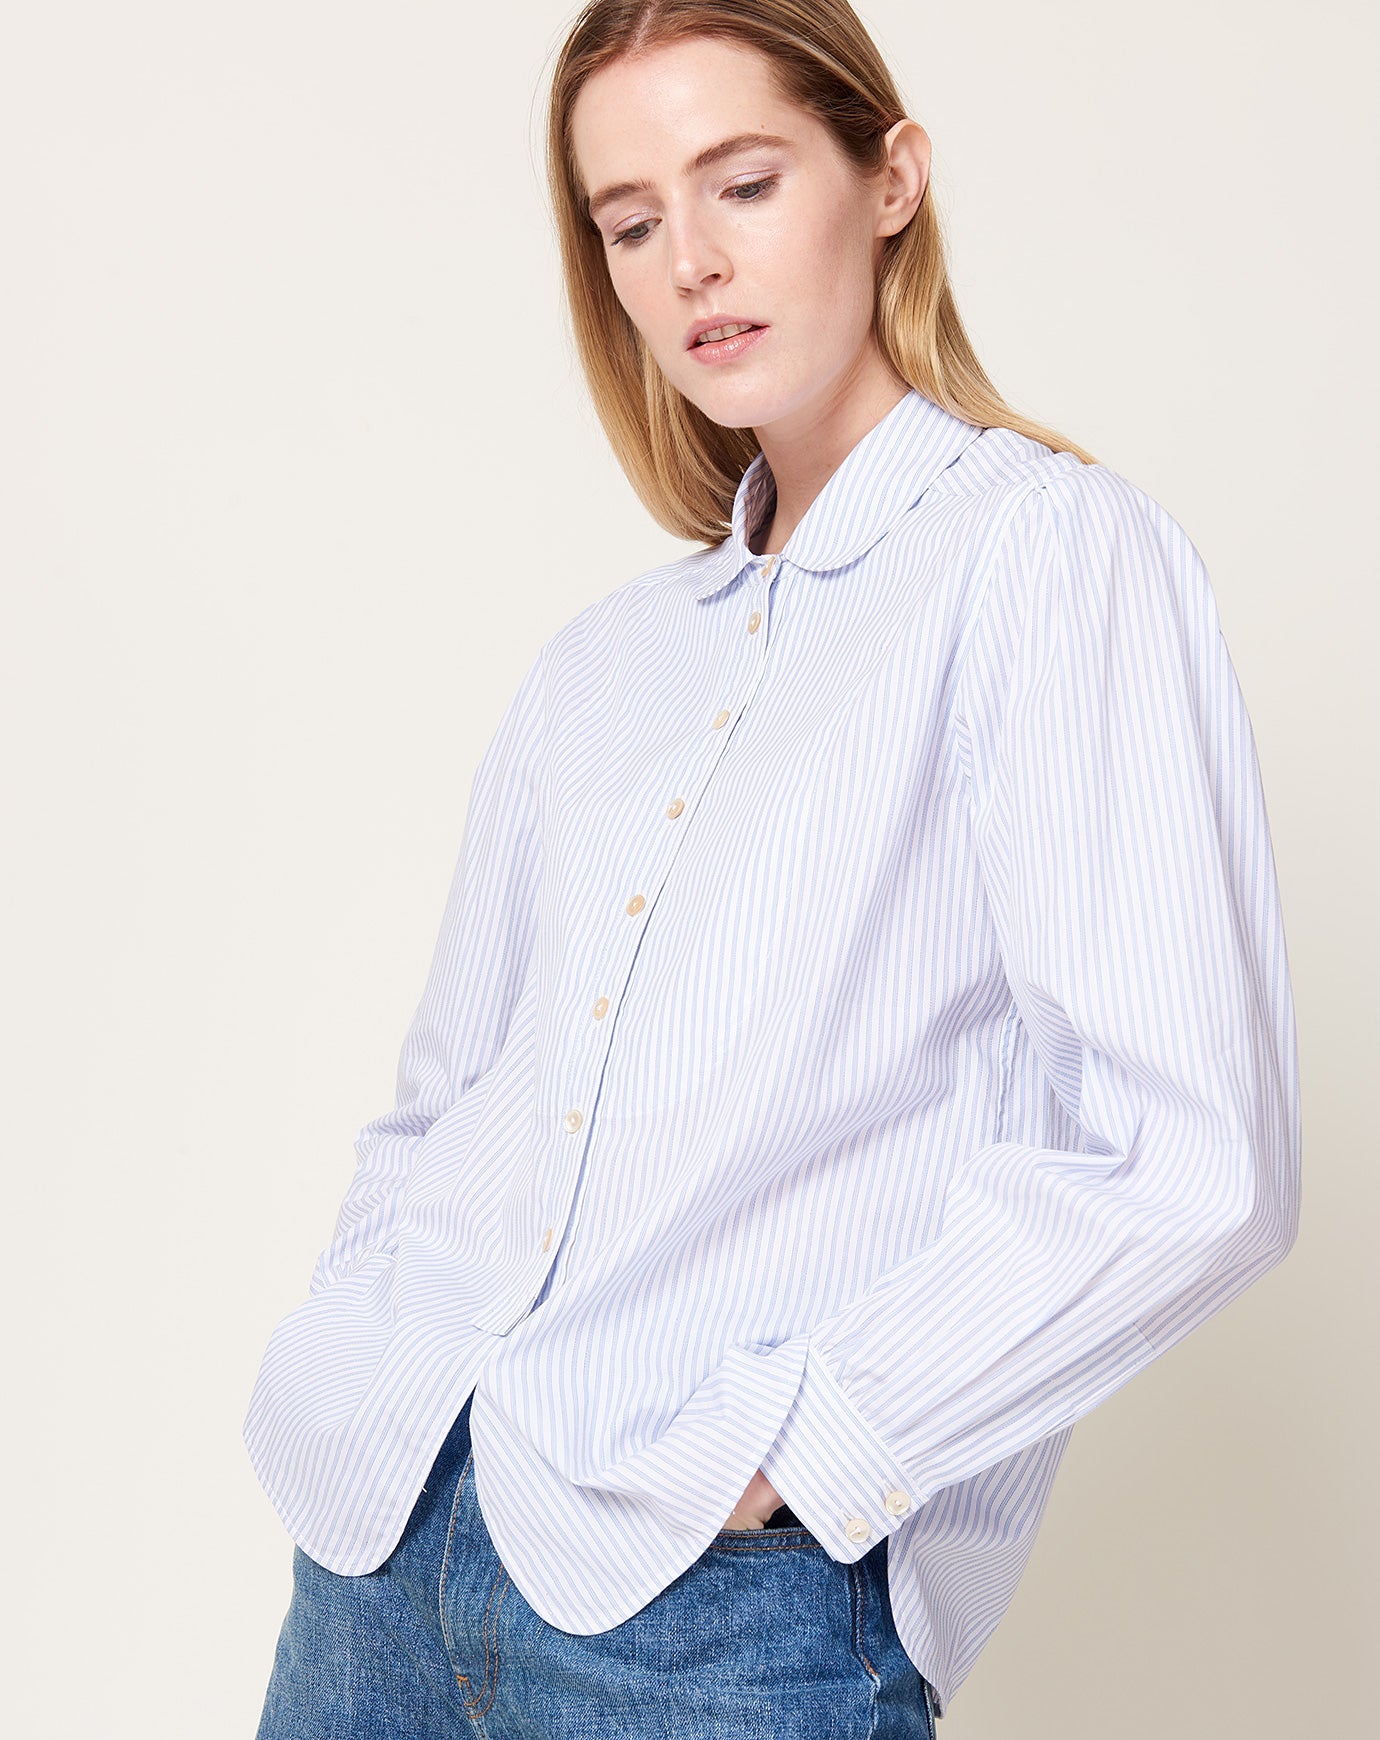 A'Court Edith Blouse in White Stripe